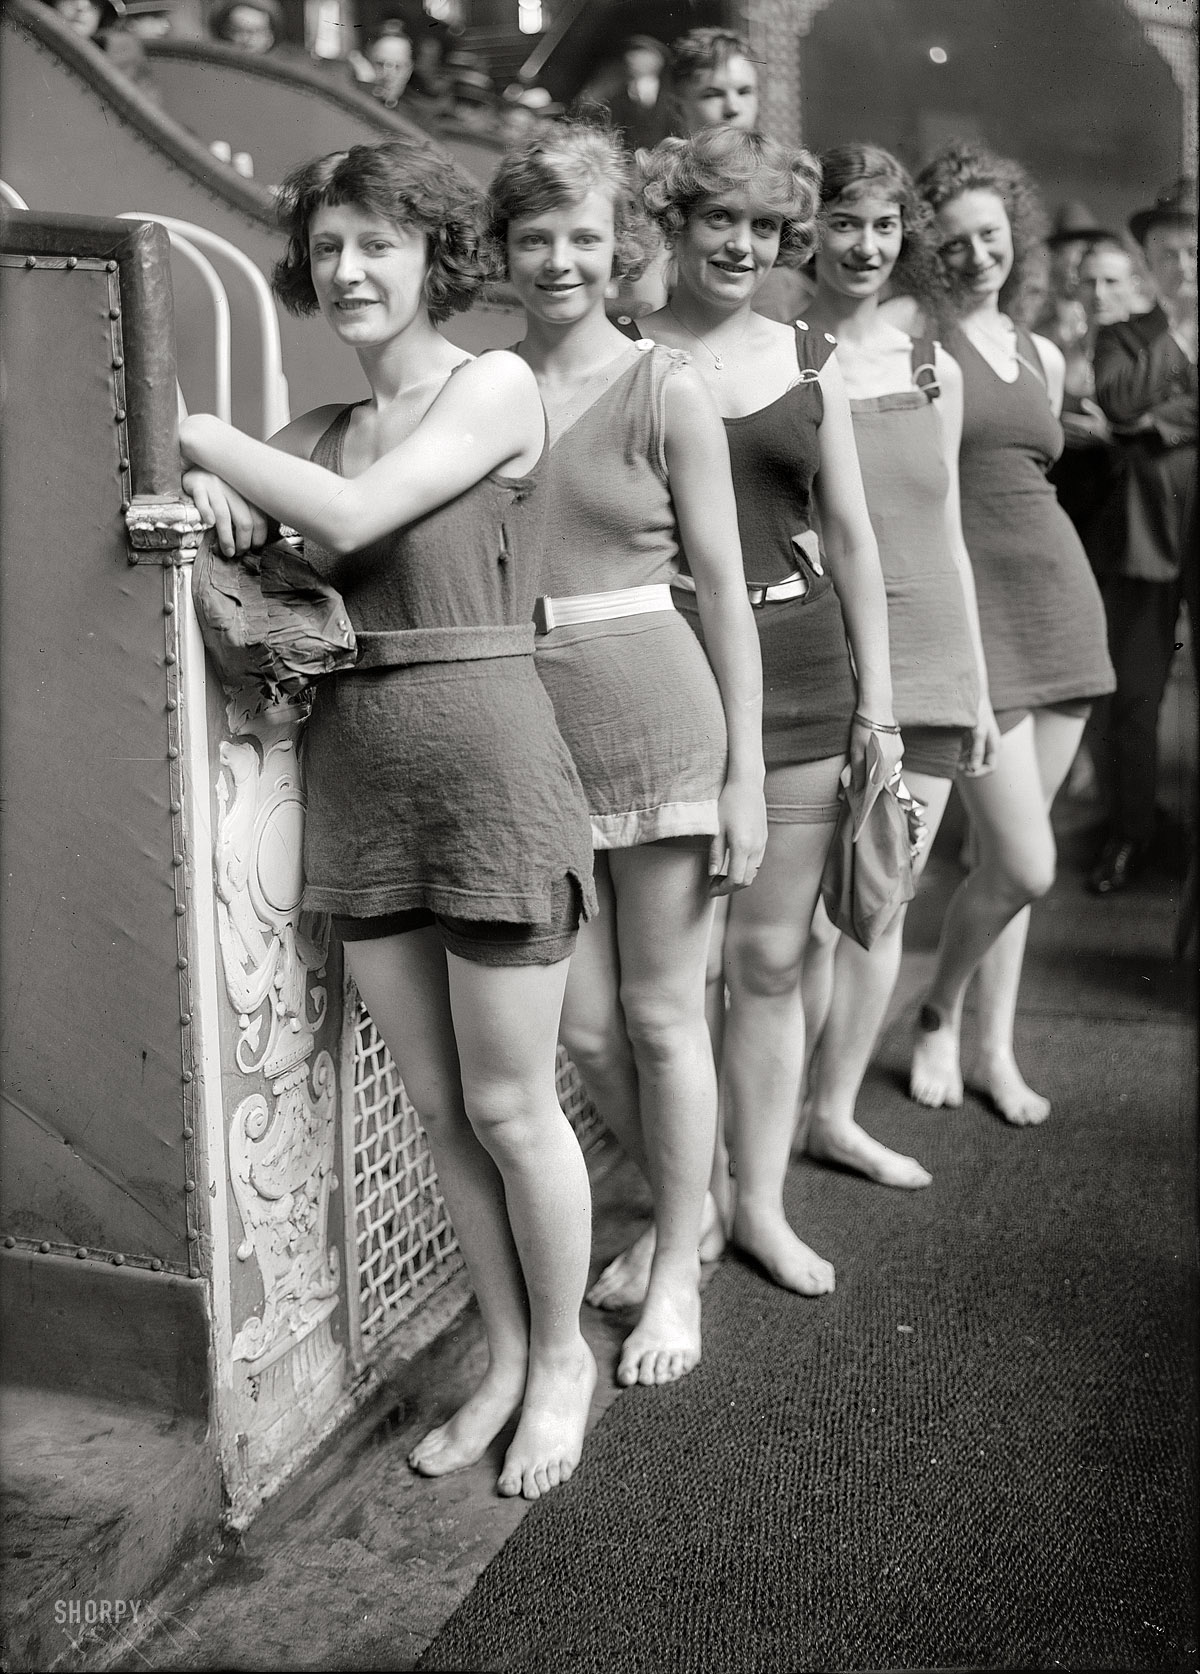 New York, July 5, 1921. "Whirl Girls." Our second look at chorus girls for "The Broadway Whirl," a musical comedy revue at the Times Square Theatre. 5x7 glass negative, George Grantham Bain Collection. View full size.